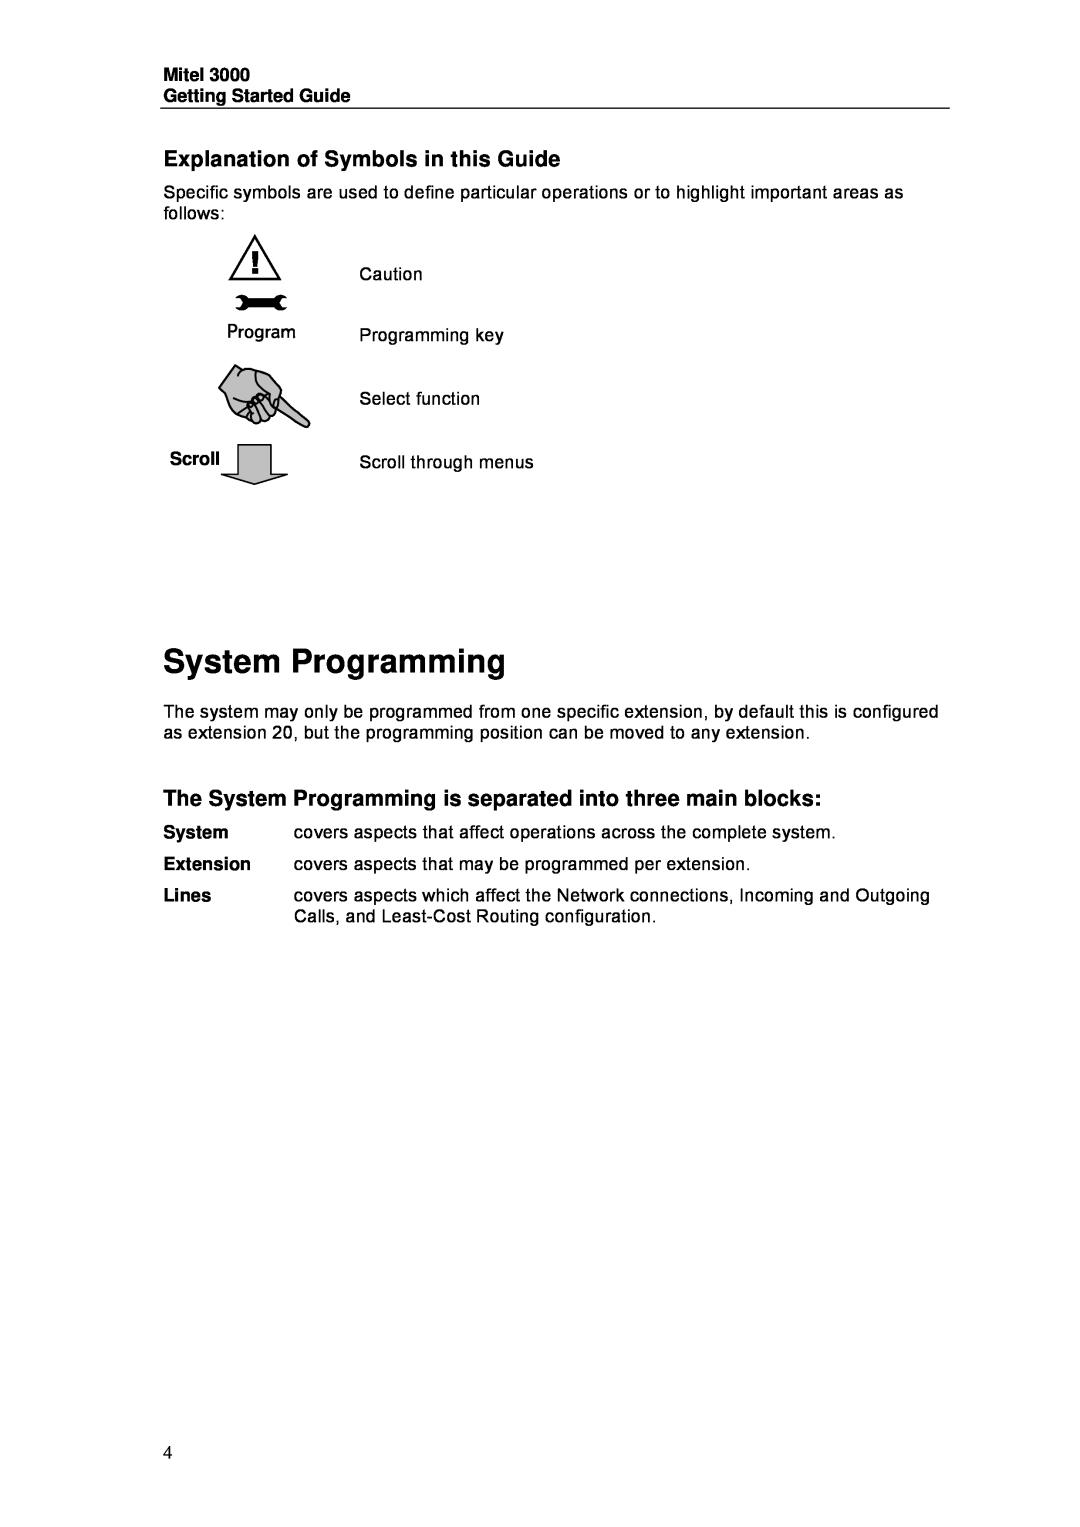 Mitel 3000 manual System Programming, Explanation of Symbols in this Guide 